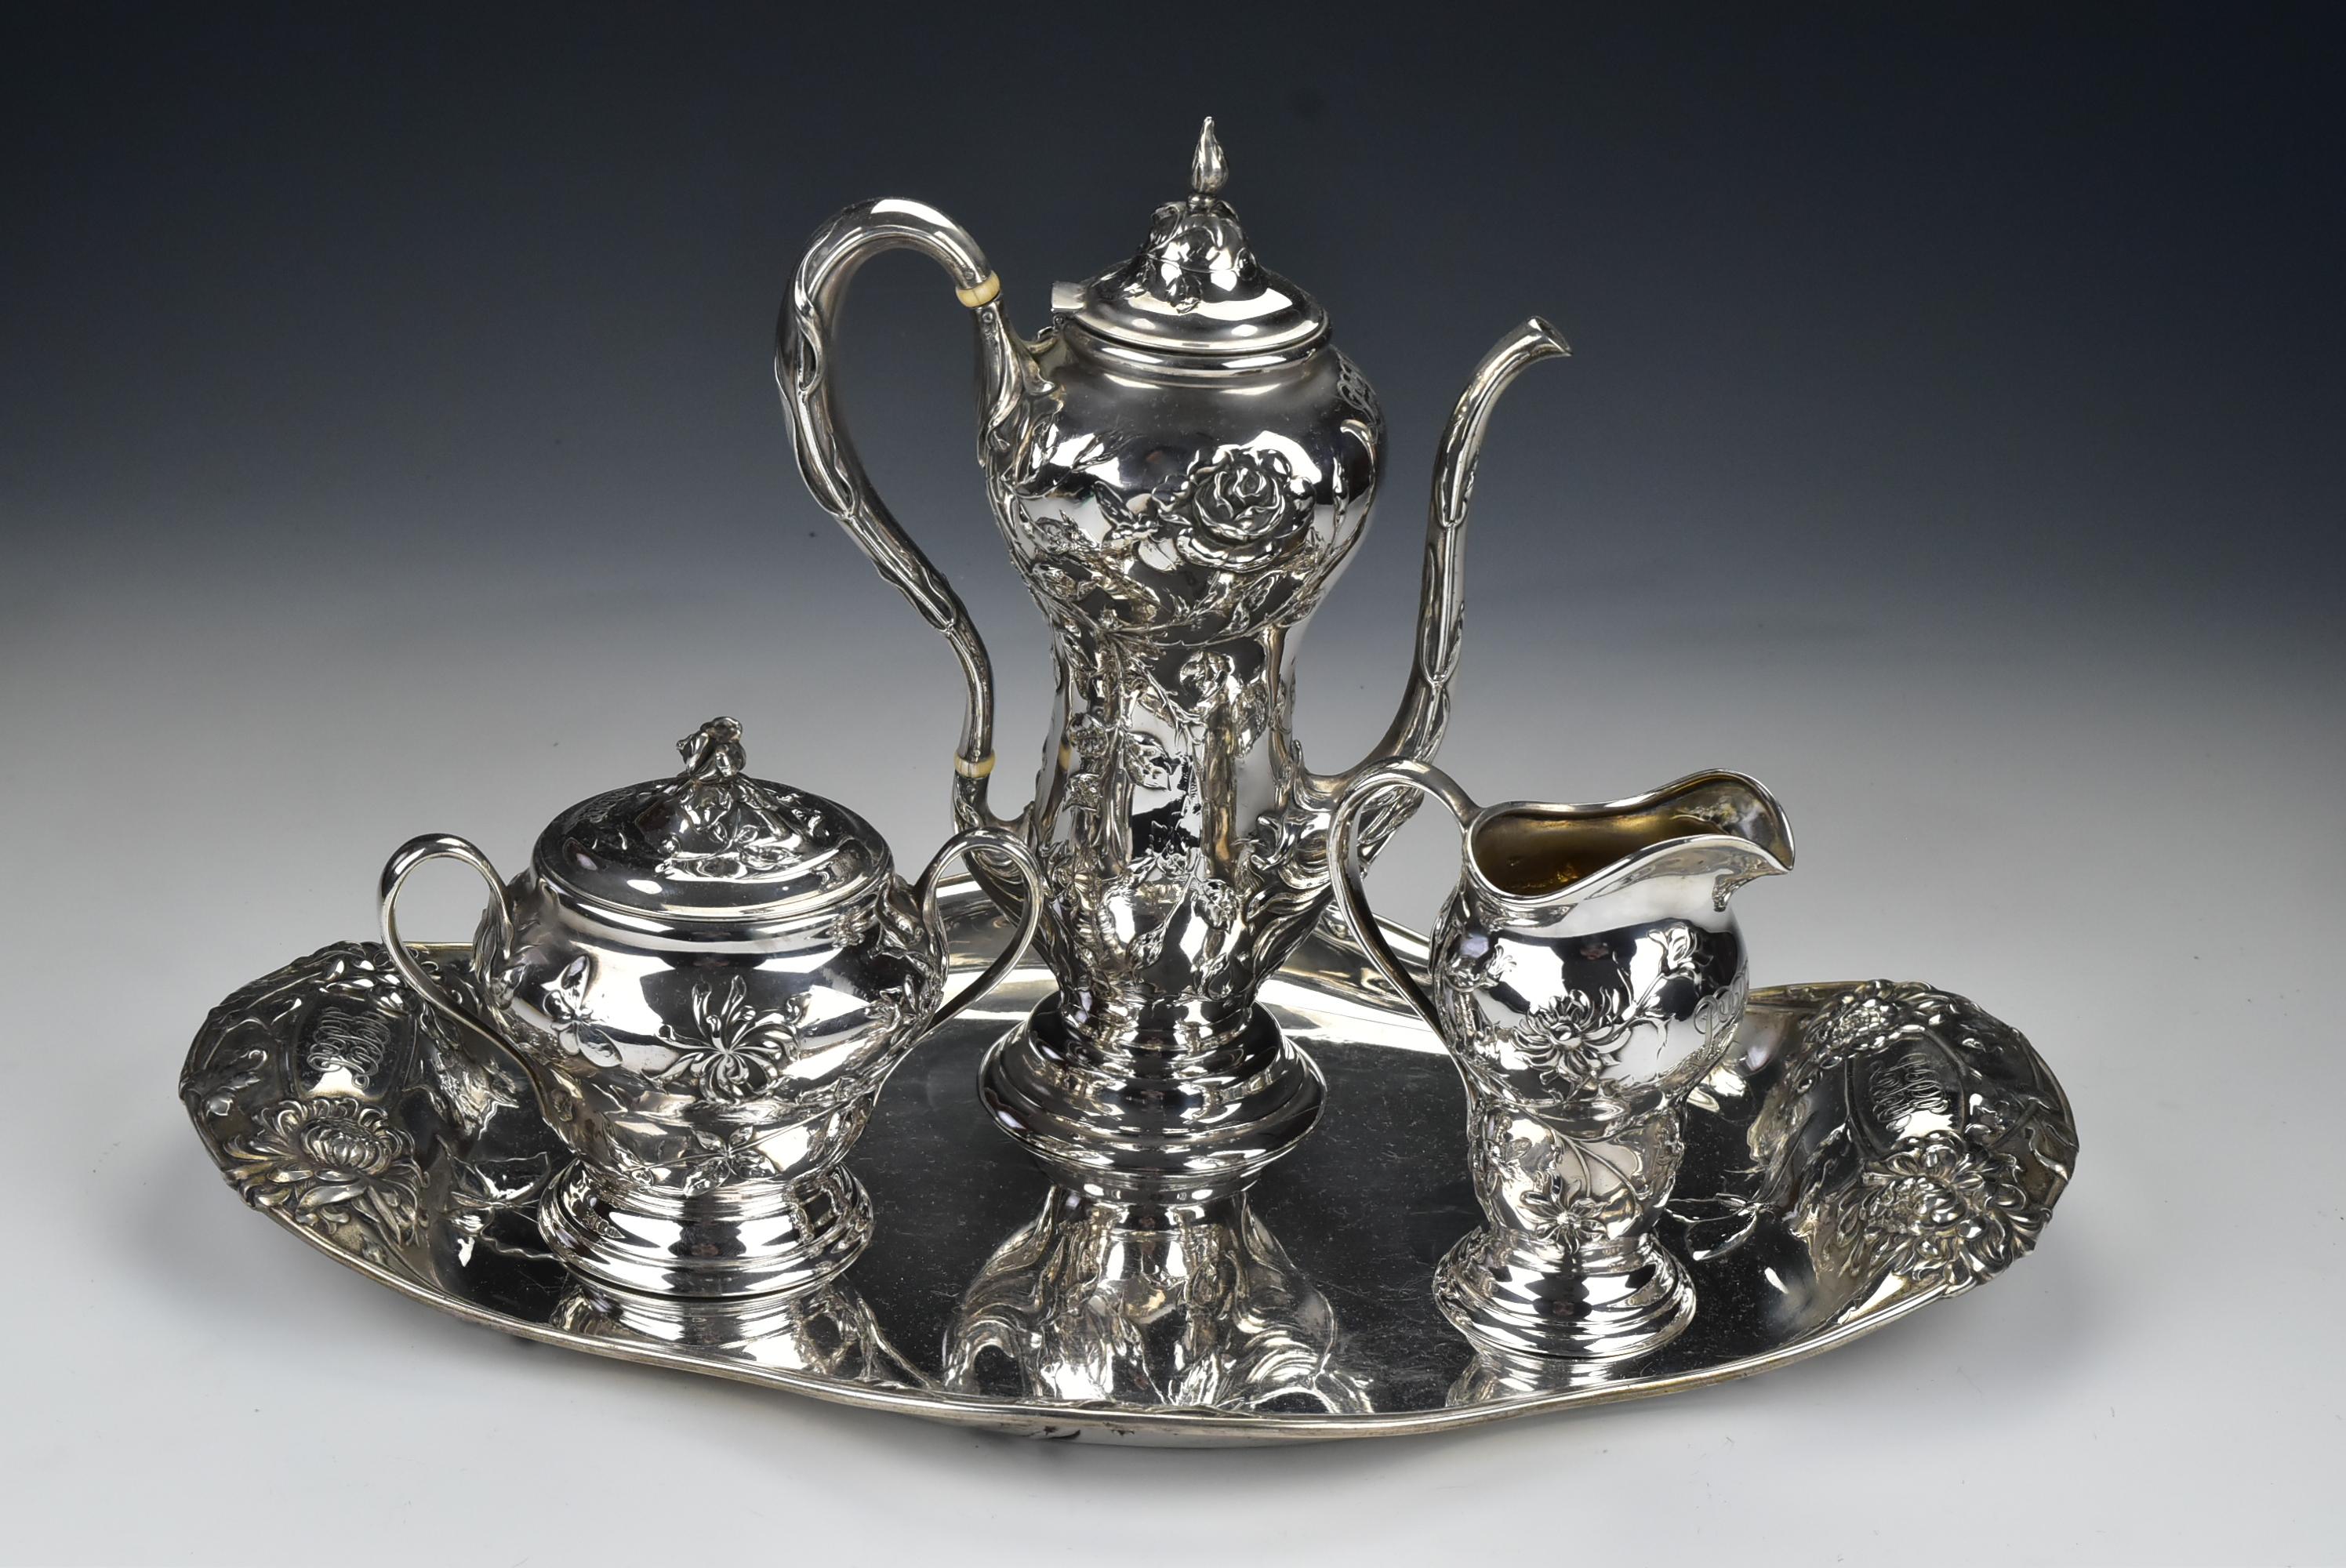 Description: Four-piece sterling silver Art Nouveau cocoa hot chocolate set includes a cocoa pot, covered sugar bowl, creamer, and tray decorated with a fancy monogram and repousse flowers with insects. Each piece is marked Marcus & Co., sterling,